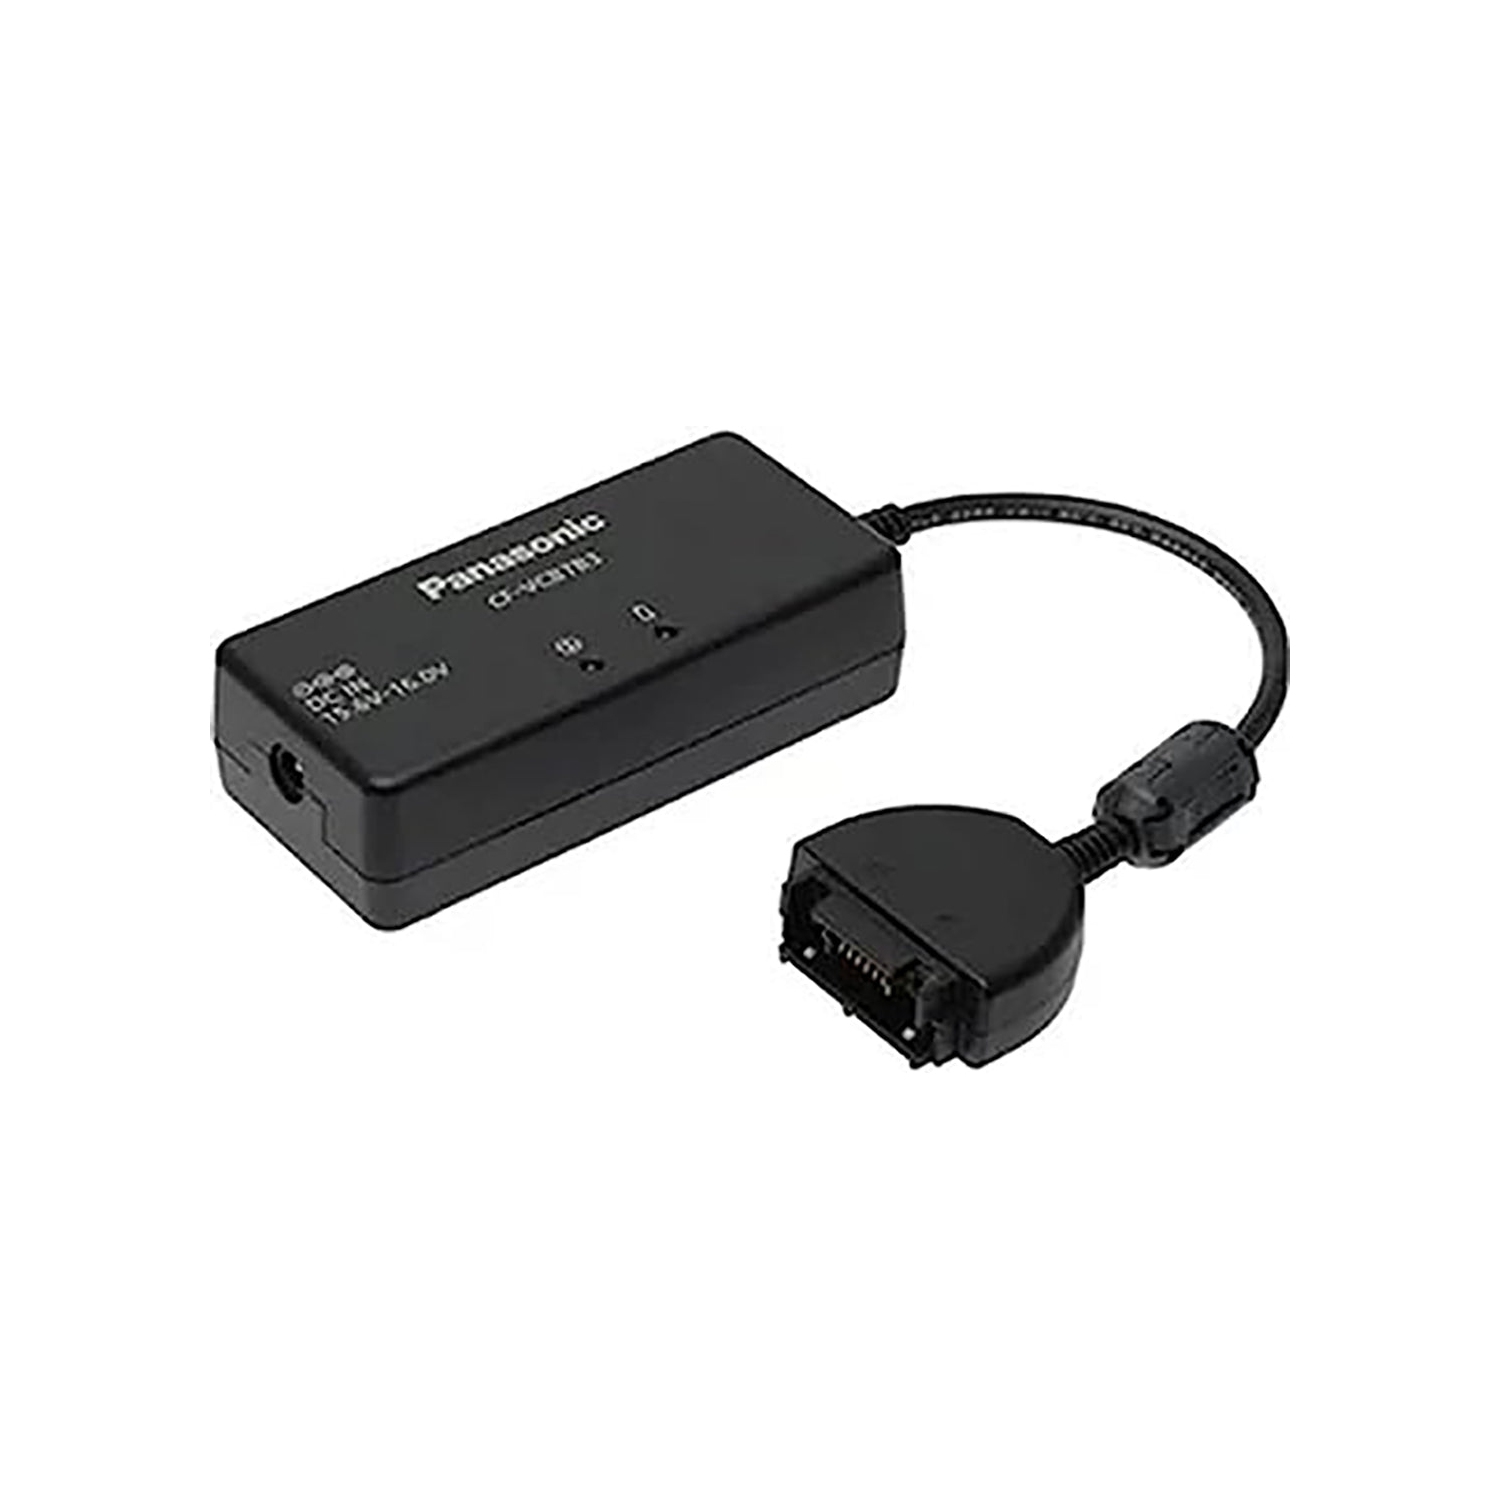 Brand New- Panasonic Single Battery Charger for Toughbook FZ-G1 - CF-VCBTB3W